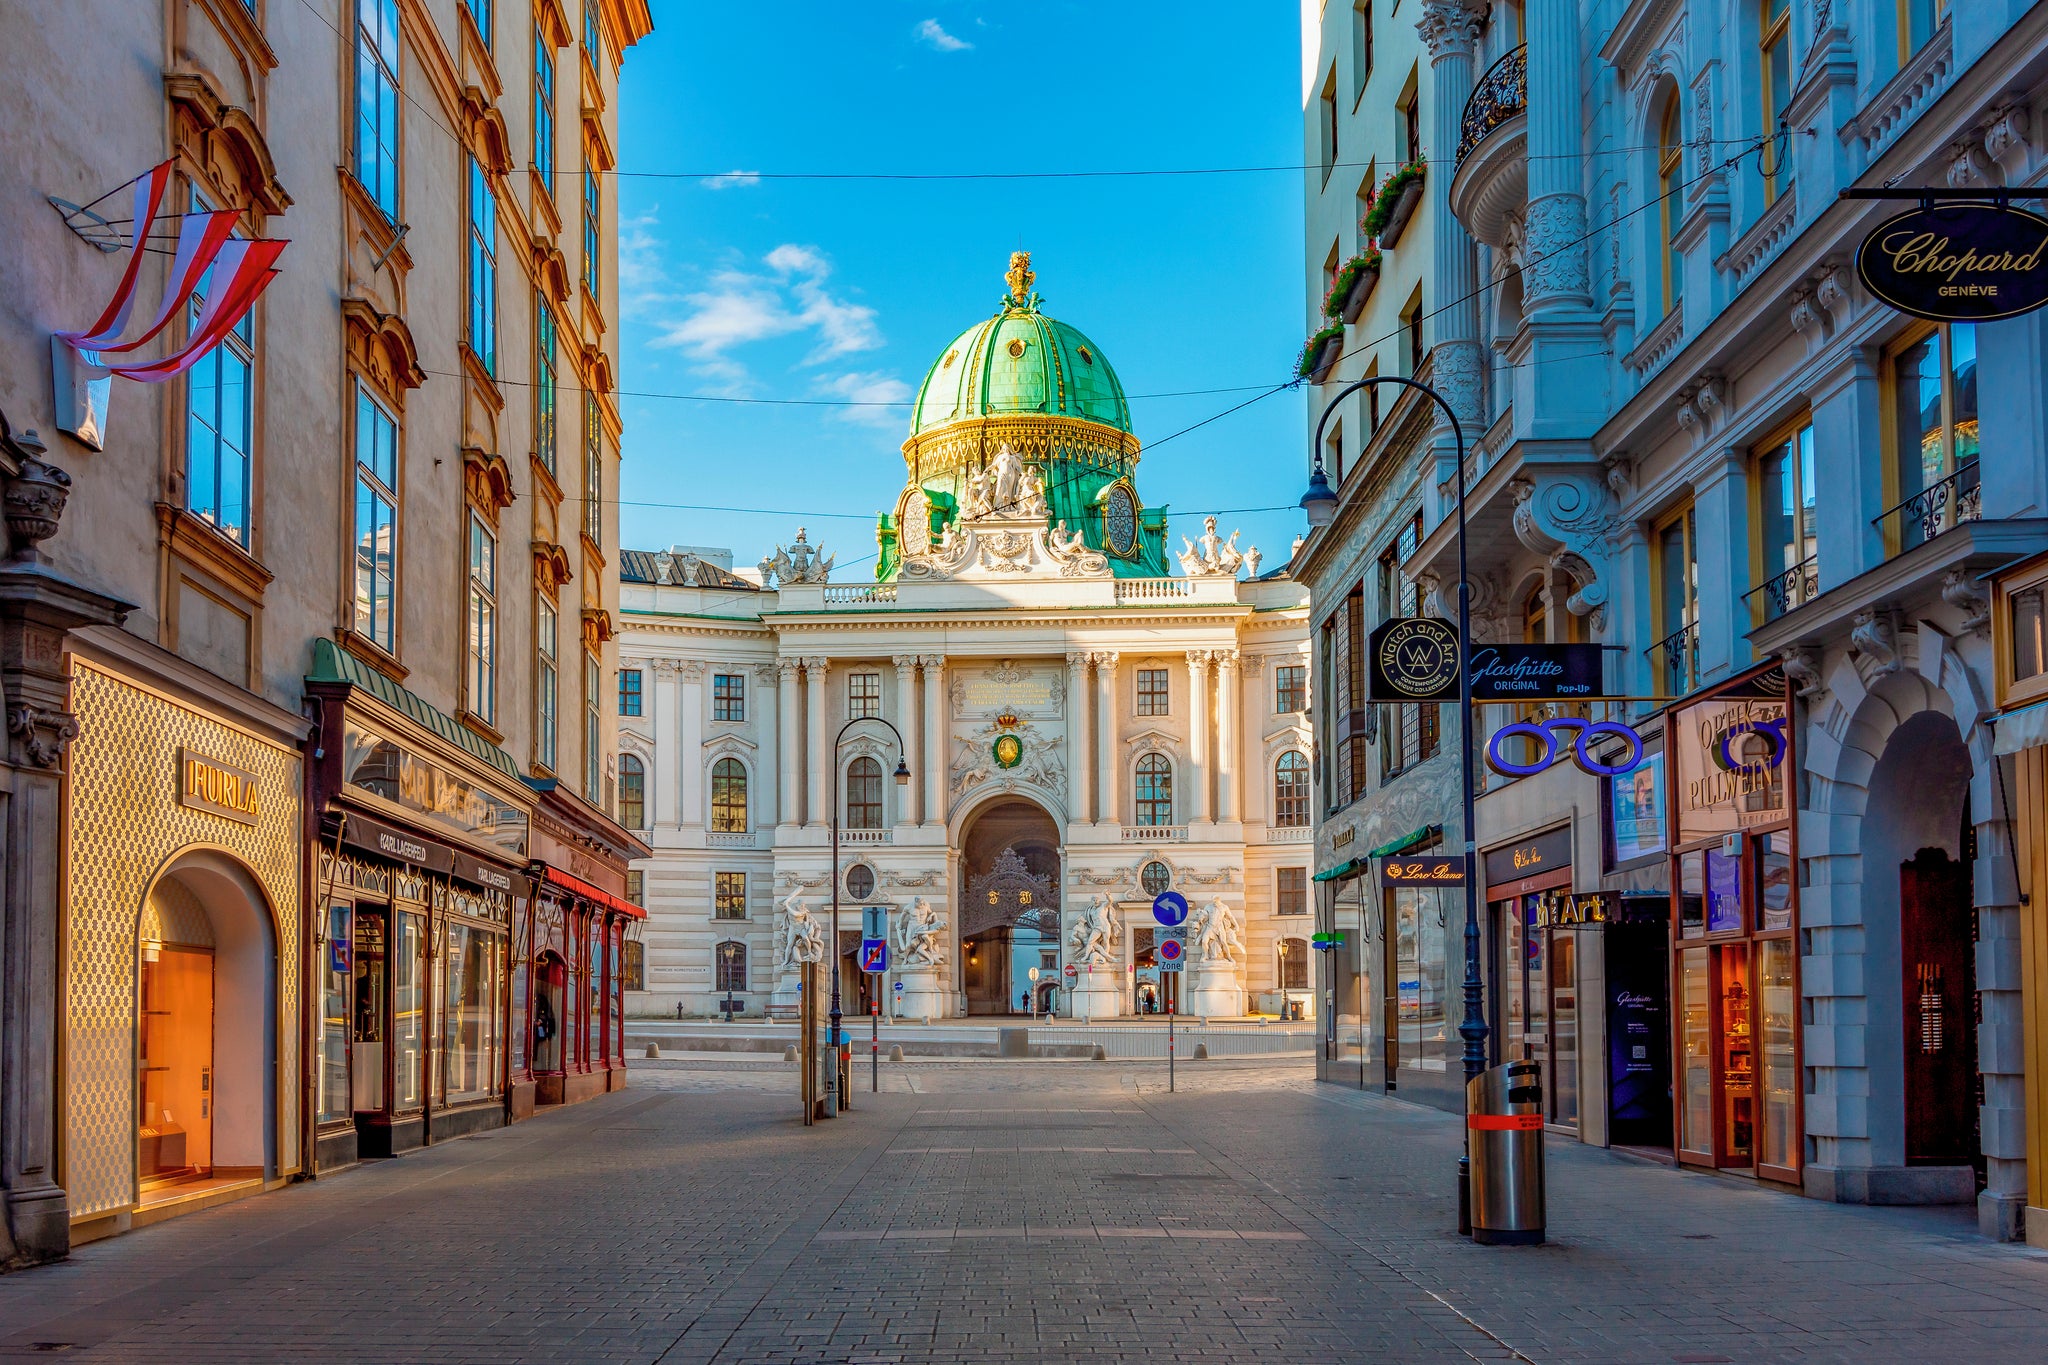 From galleries, museums and concerts, to shopping and nature, Vienna has it all